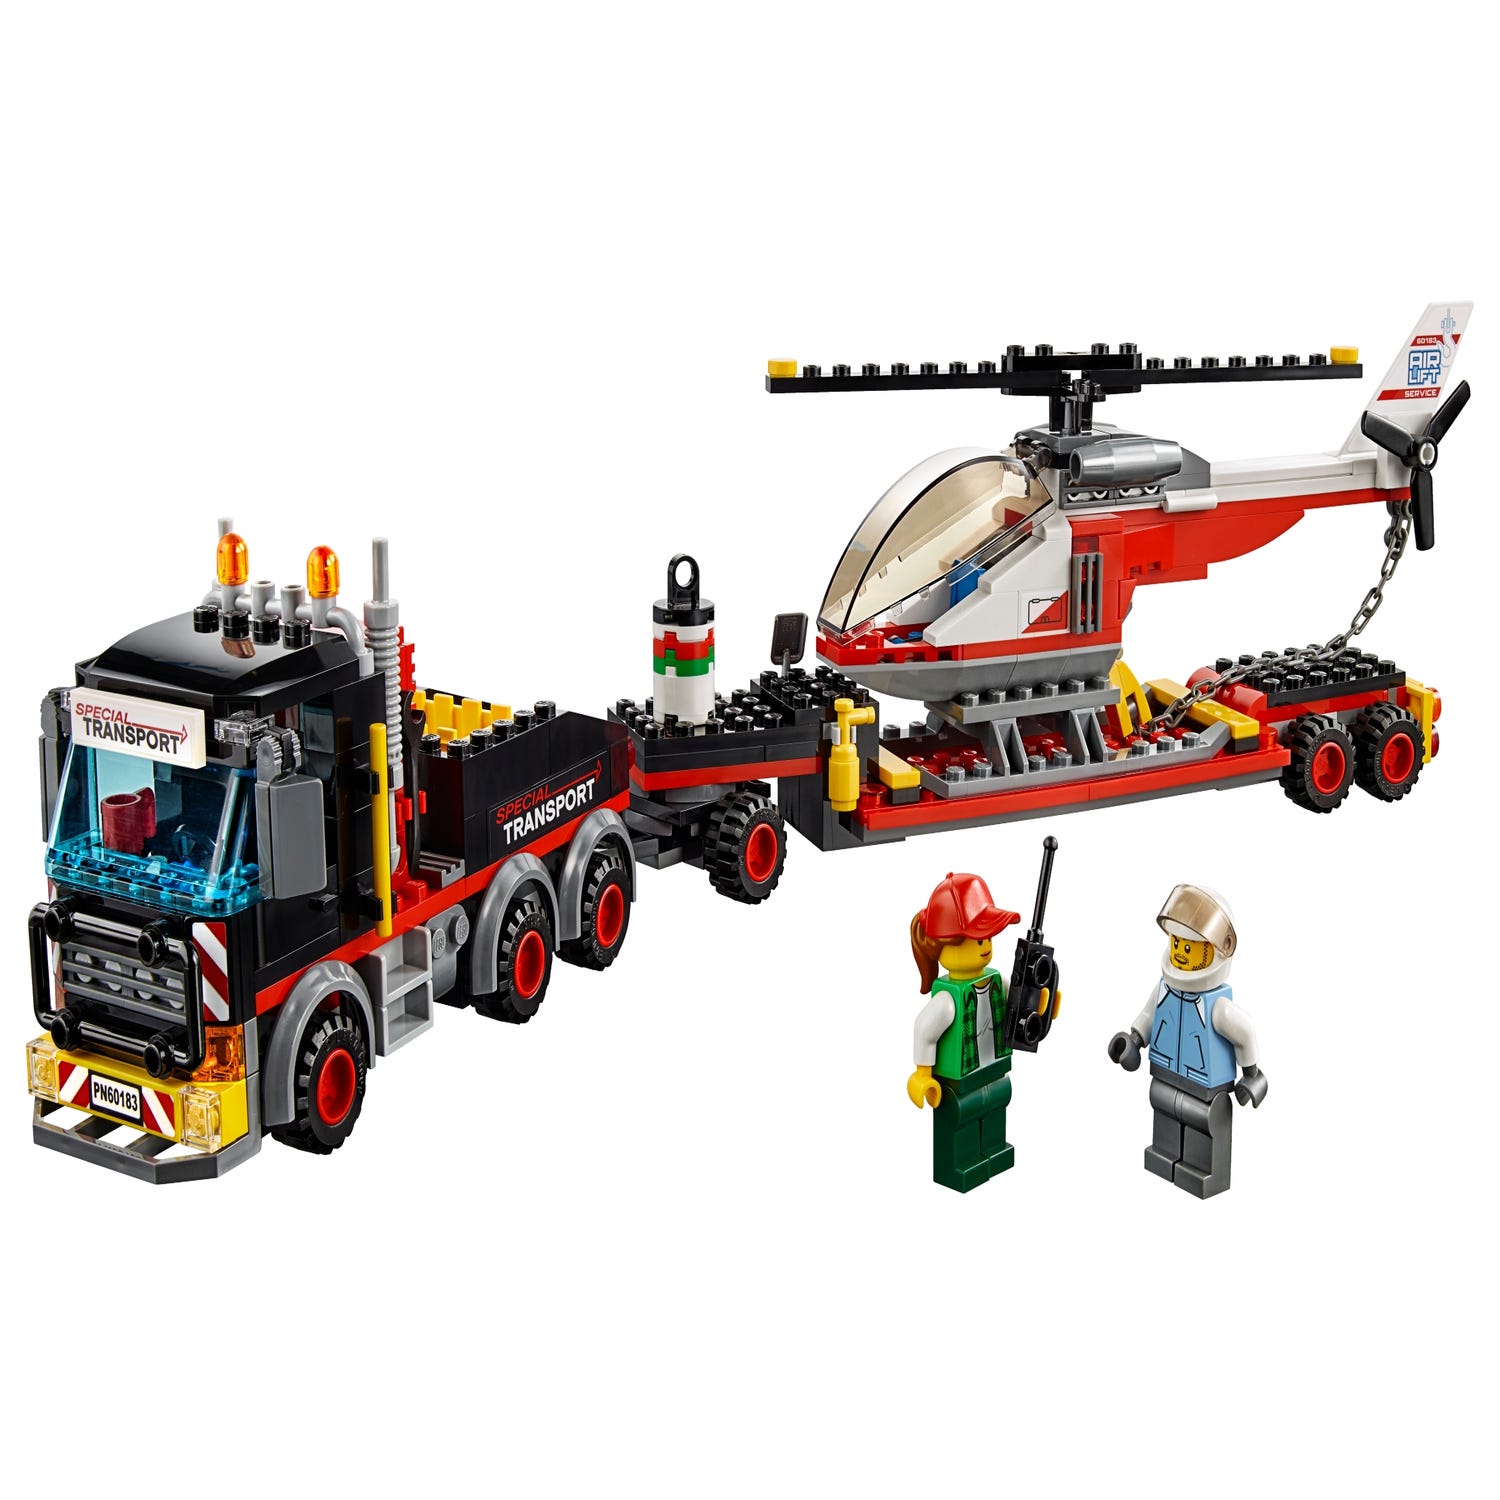 Cargo Transport 60183 | City | online at the Official LEGO® US